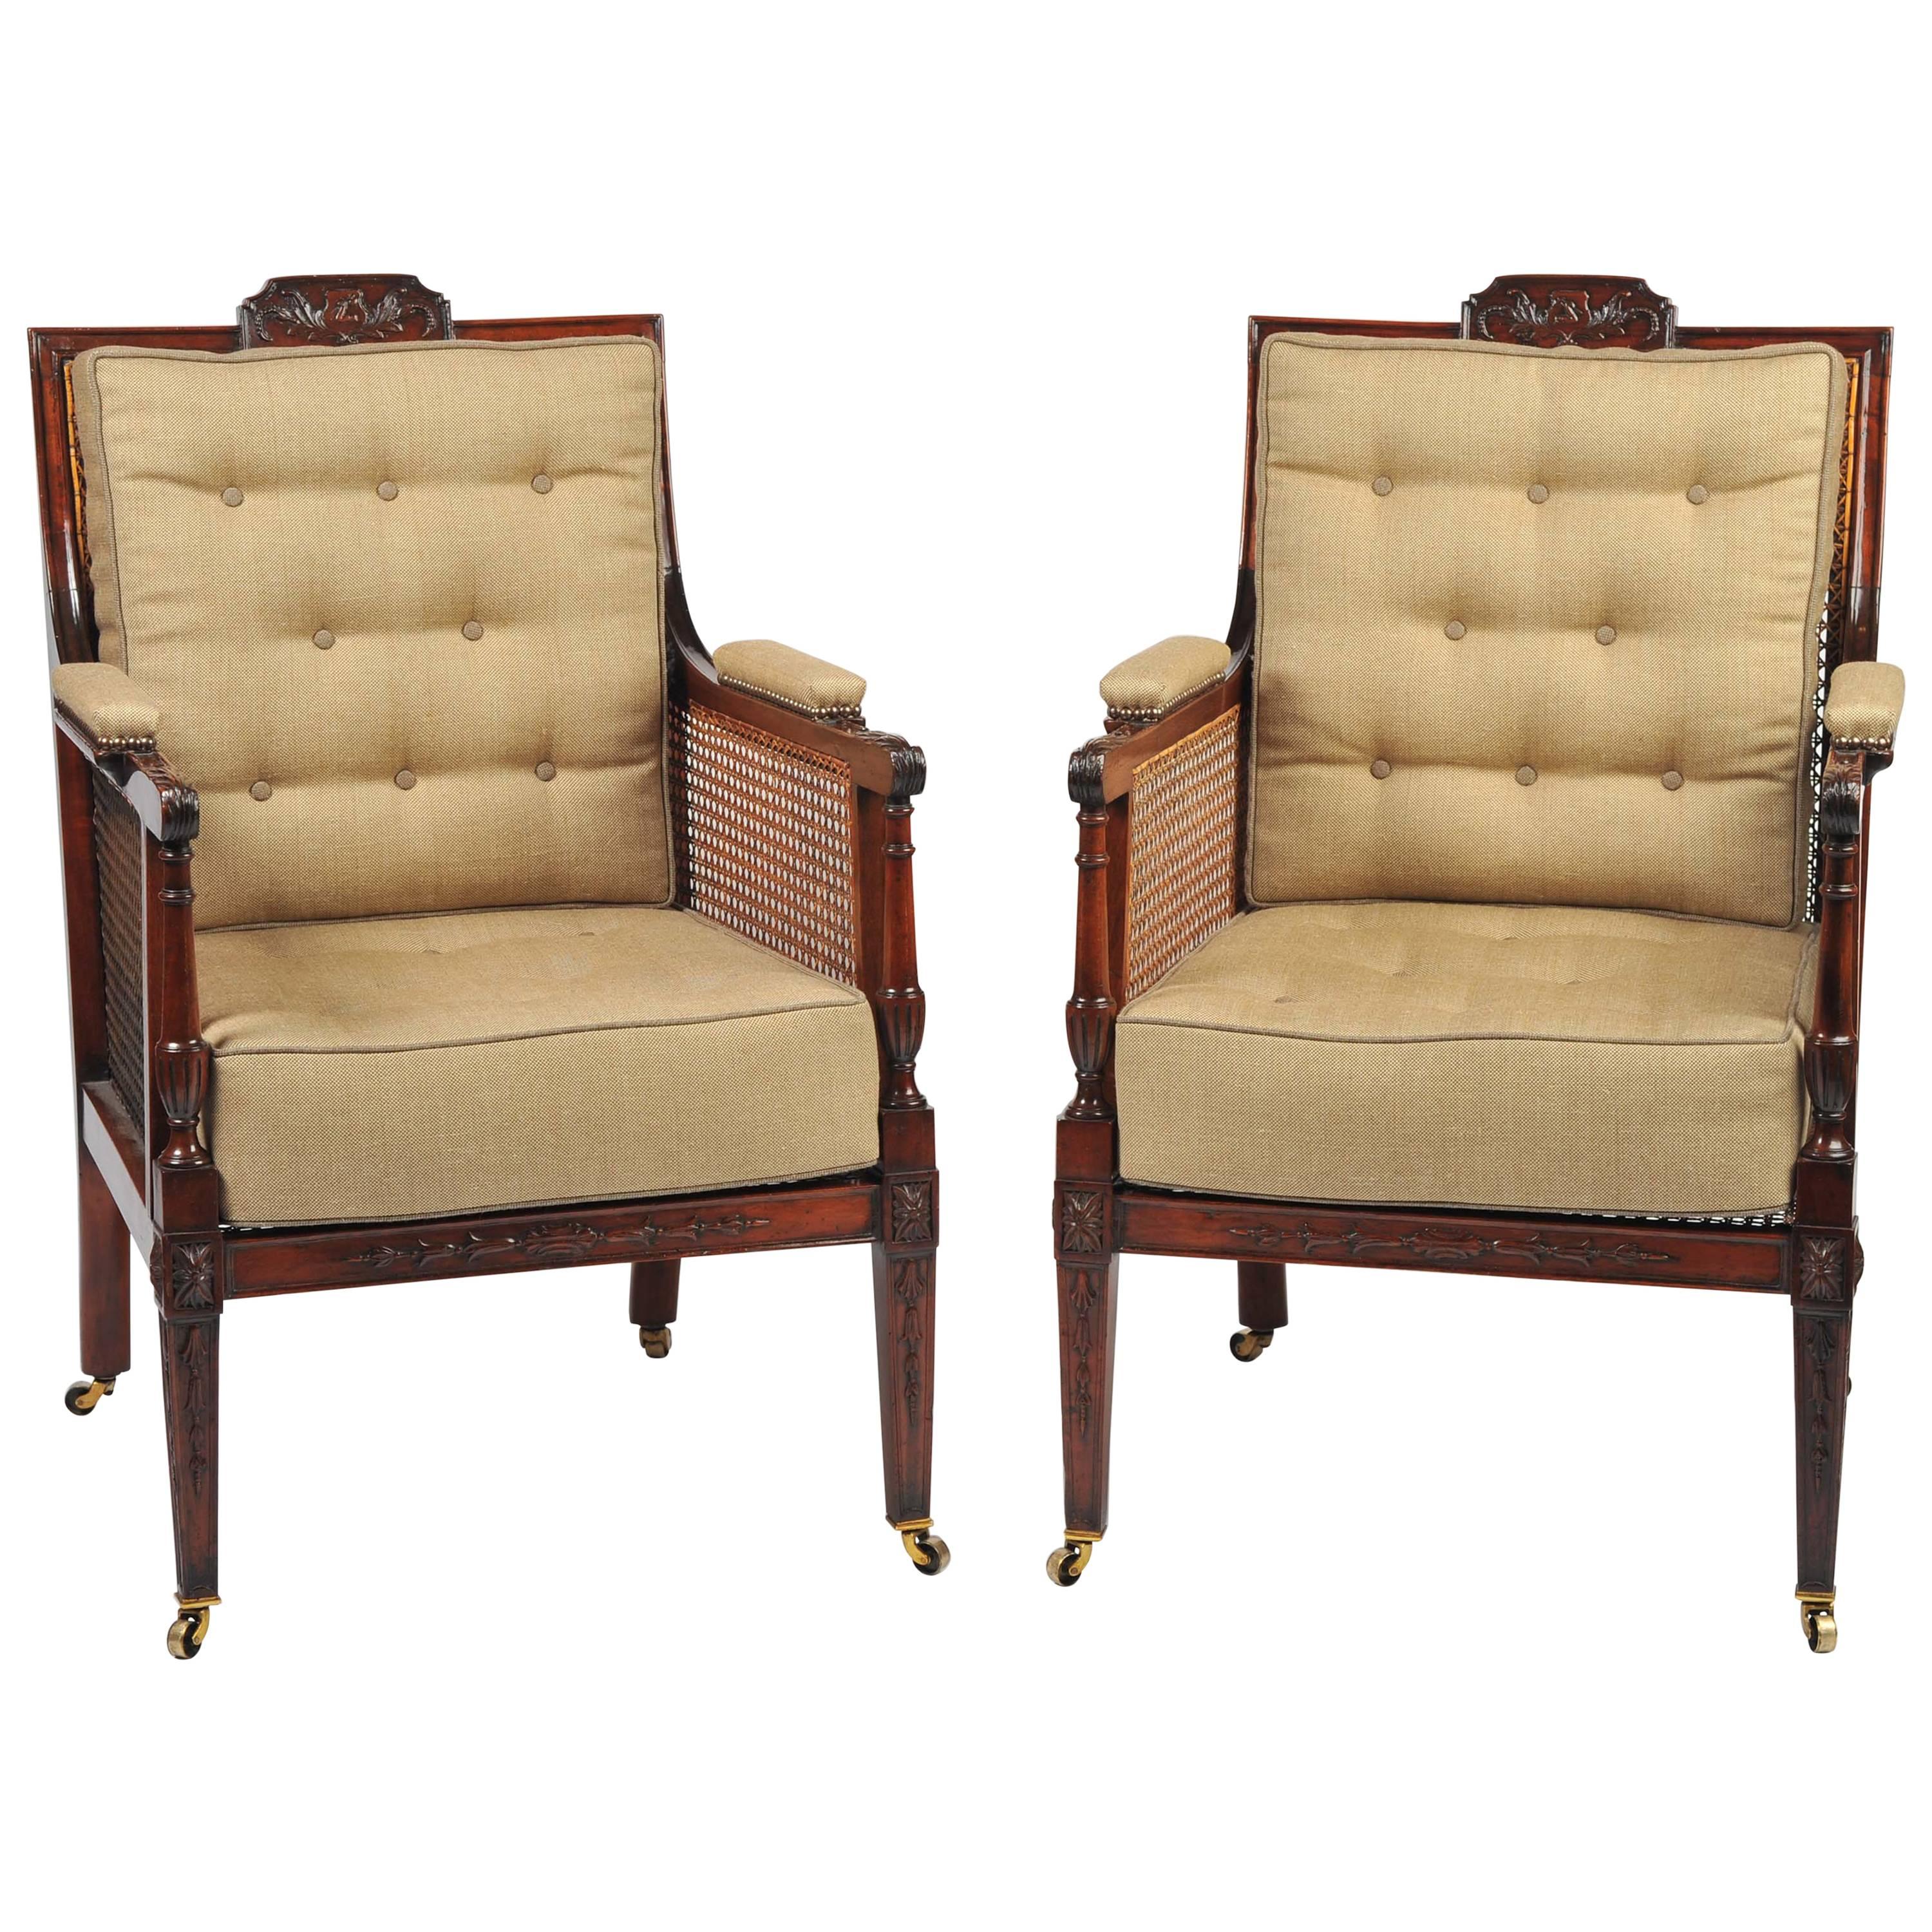 Pair of 19th Century Mahogany Caned Library Chairs